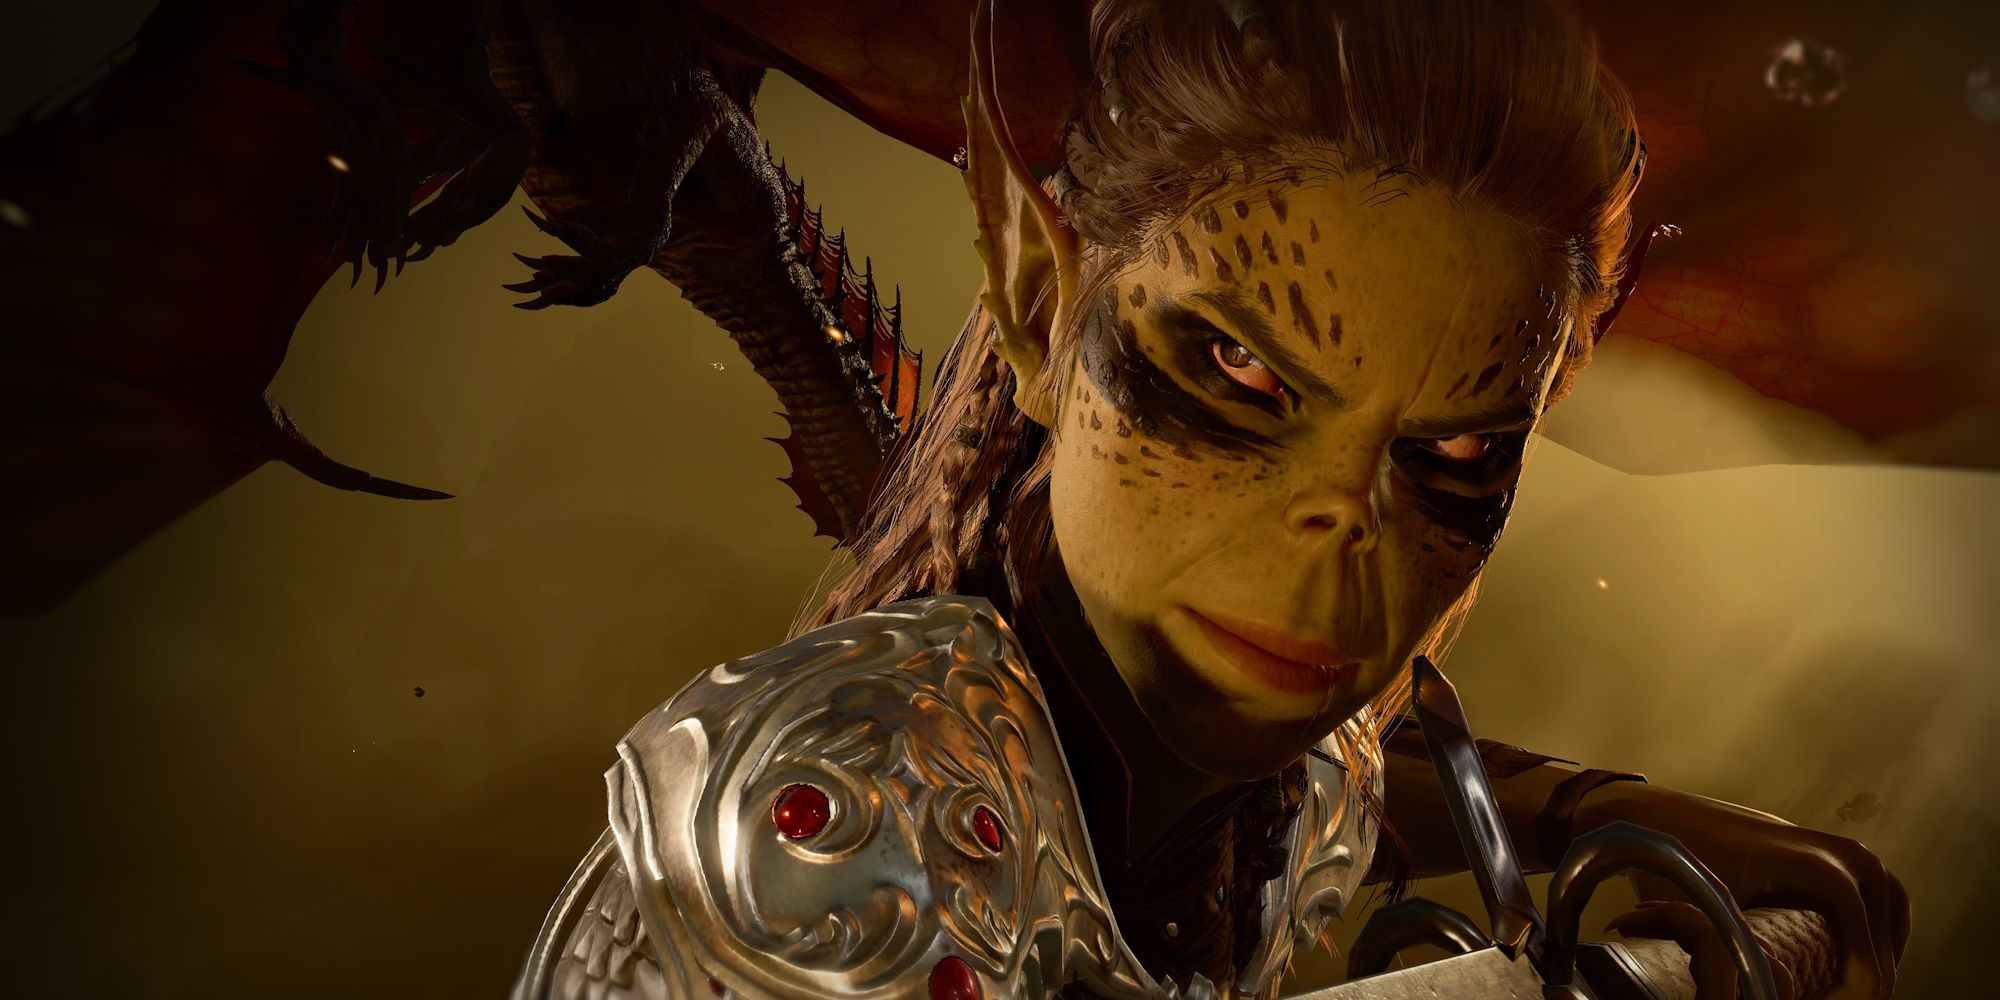 Baldur’s Gate 3: Should You Give The Githyanki Egg To Lady Esther?